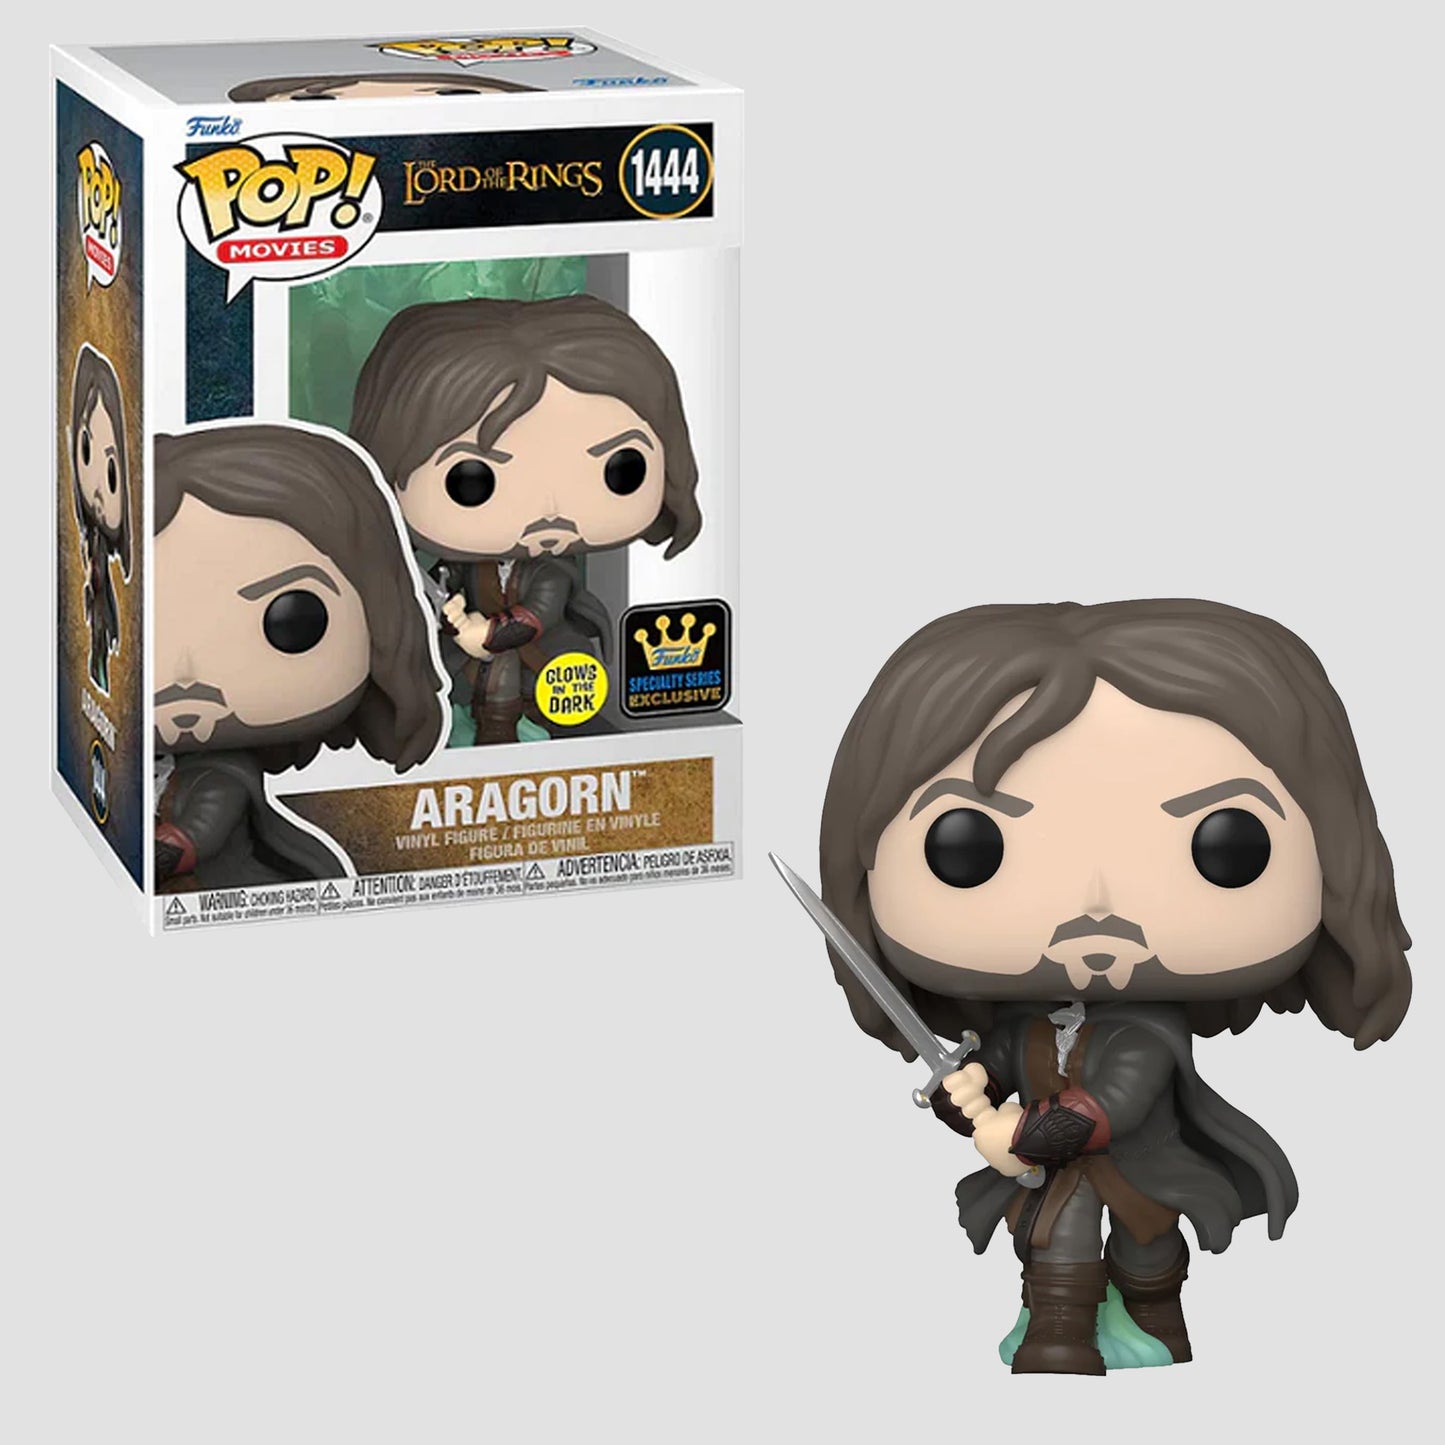 Aragorn (Lord of the Rings) Army of the Dead Specialty Series Glow-in-the-Dark Funko Pop!